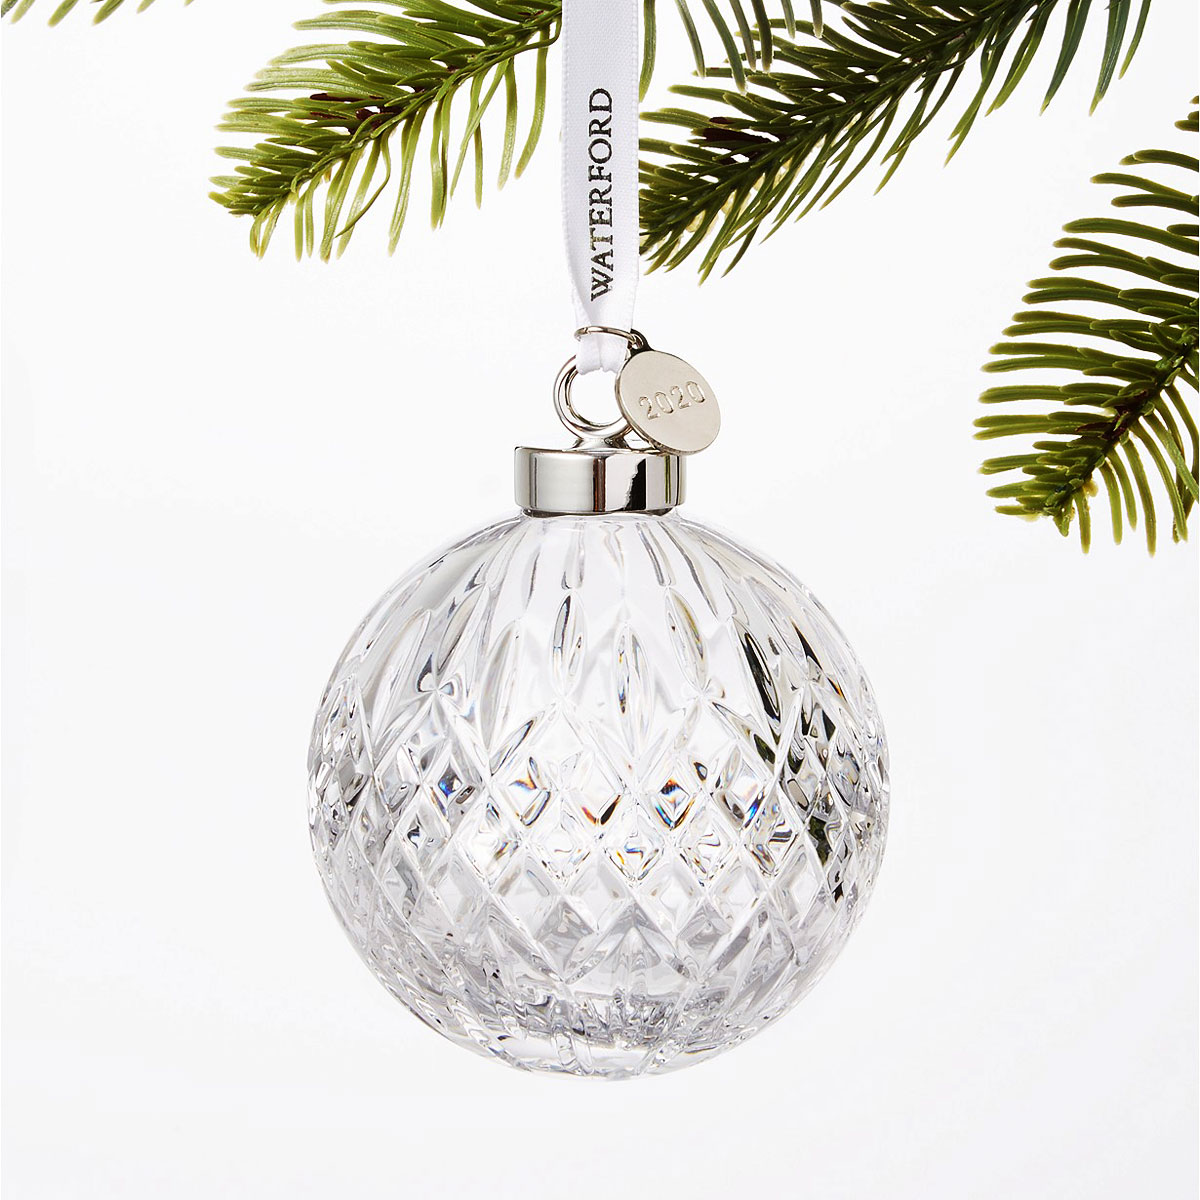 Waterford 2020 Crystal Ball Ornament